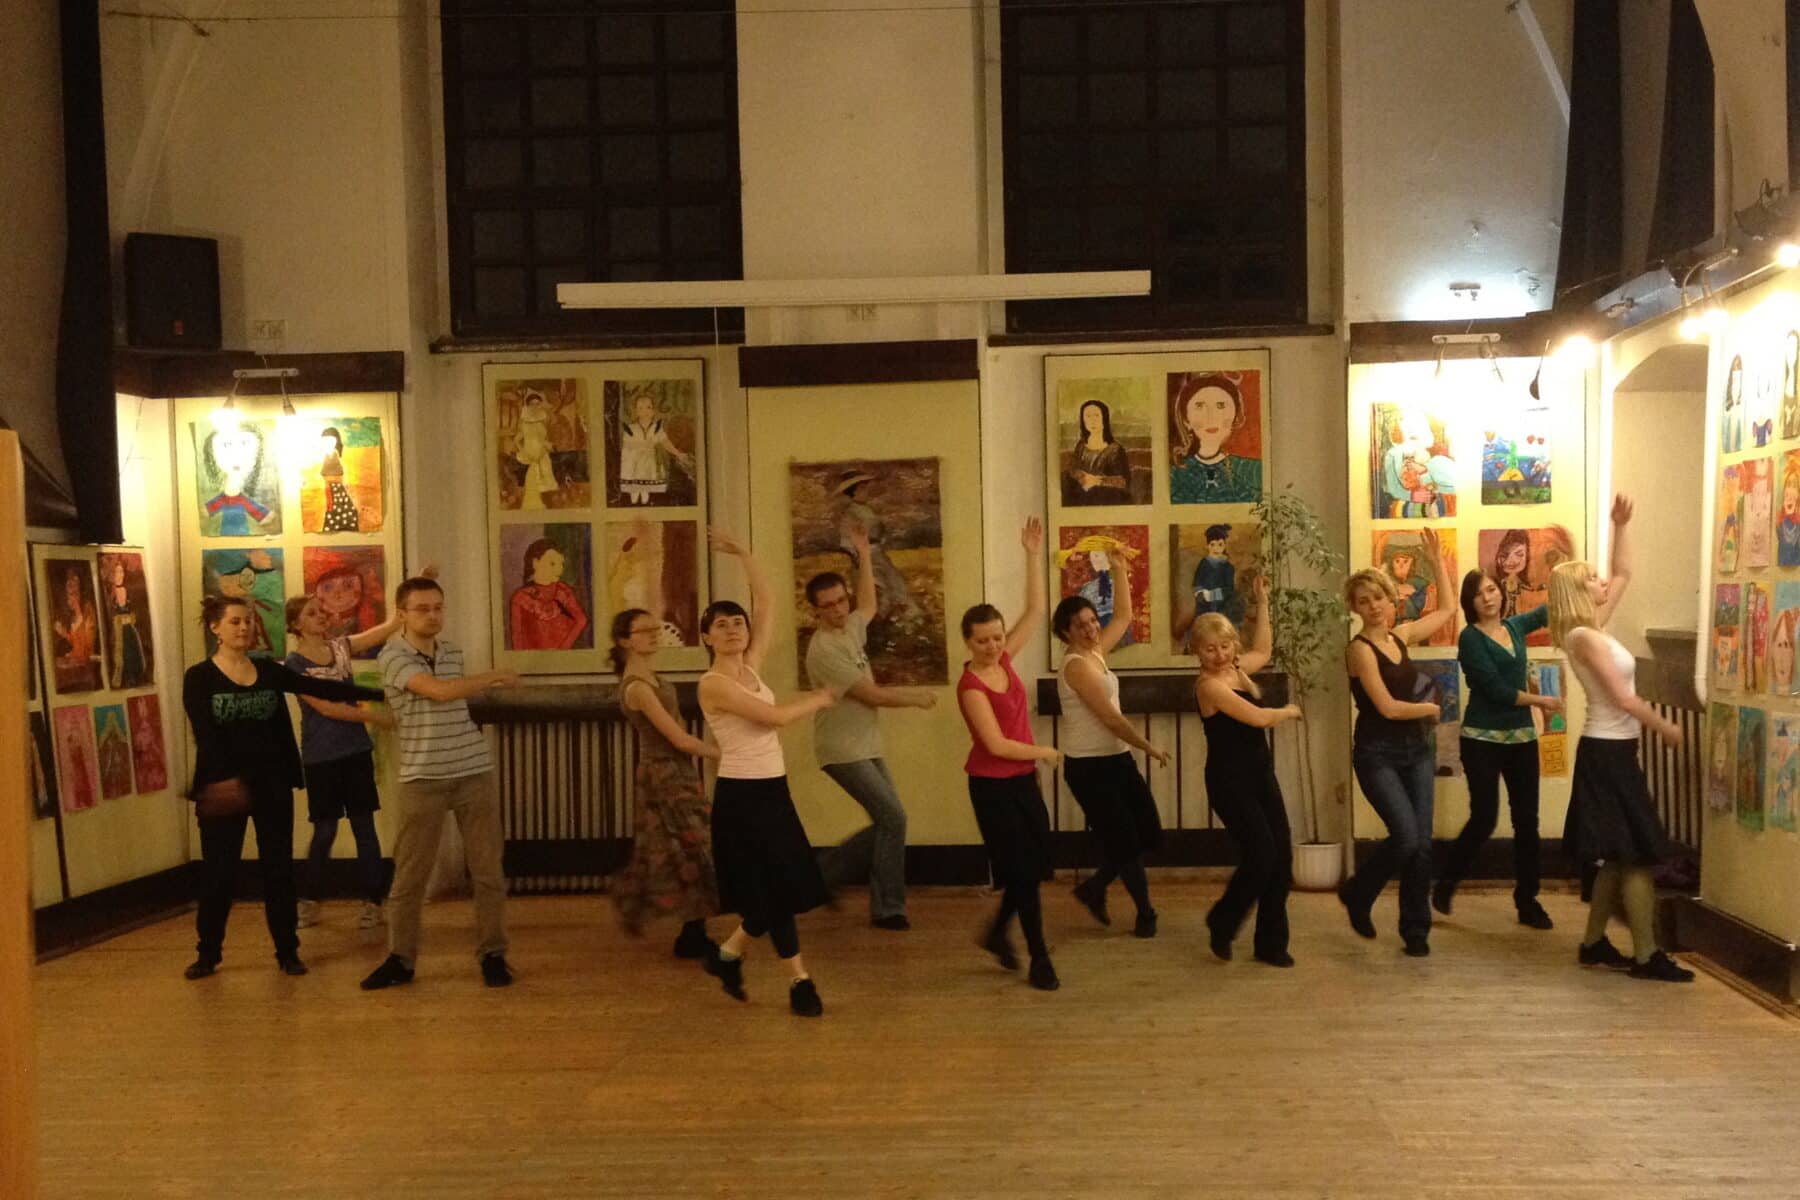 Members of the dance troupe Kachol rehearsing at the Popper synagogue in Kraków’s Kazimierz neighborhood.   